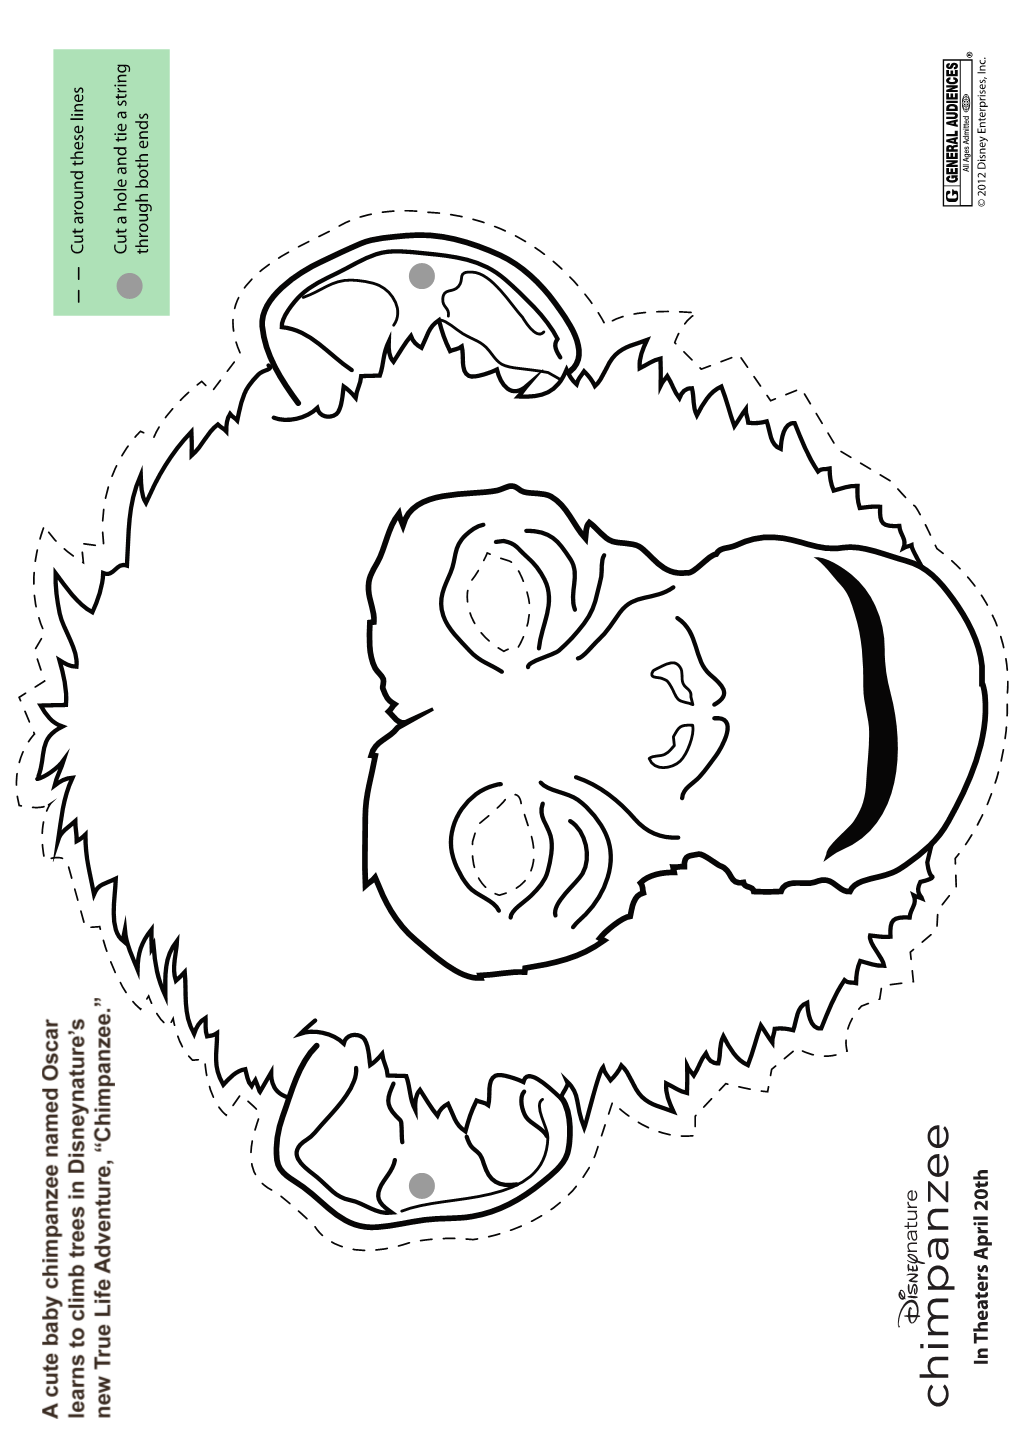 Print out Some Chimpanzee-Related Activities